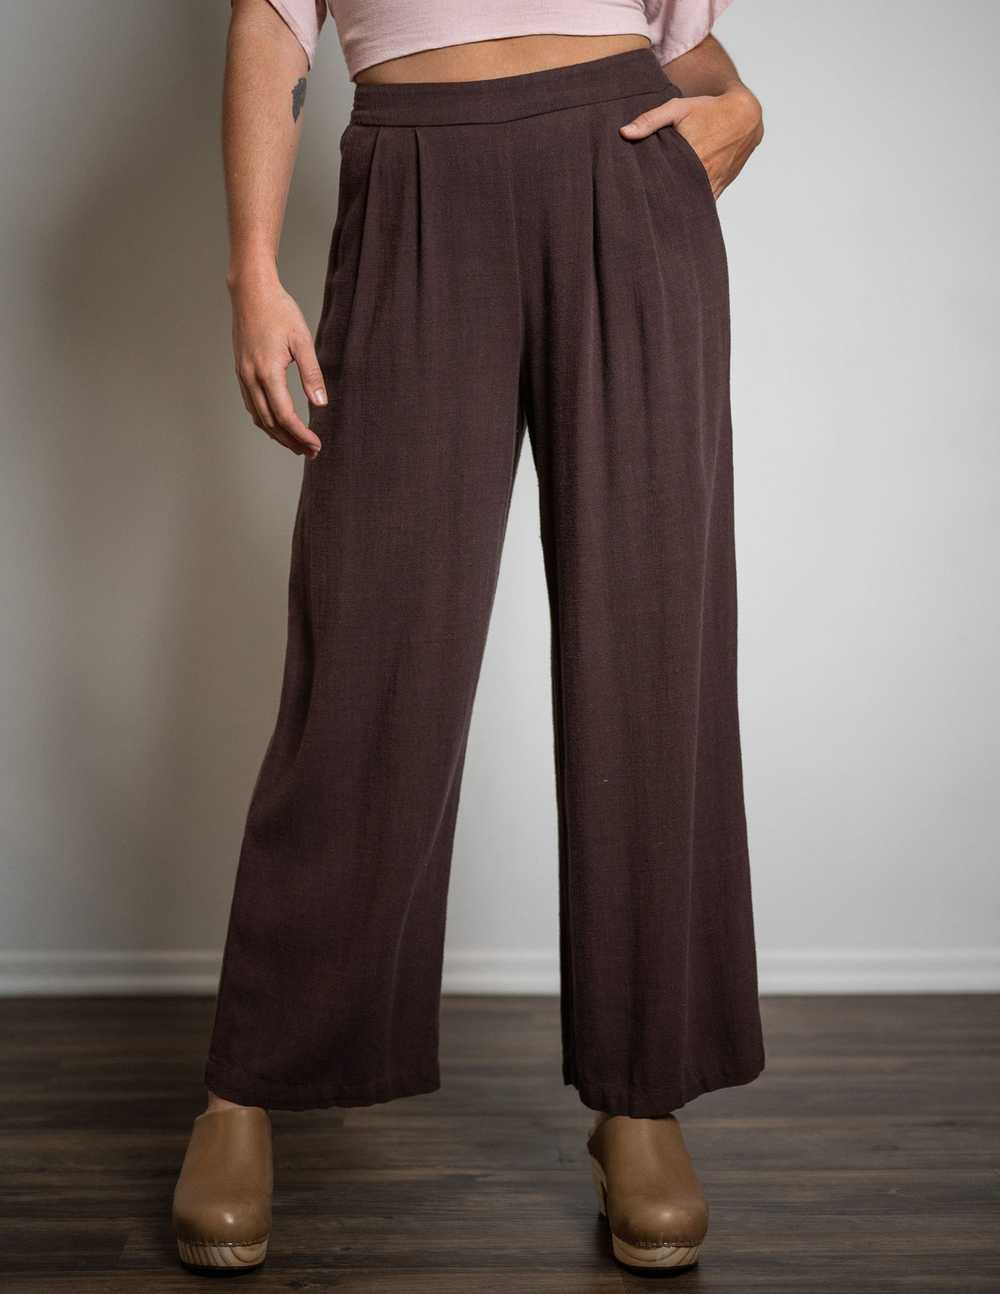 Sozy Linen Alessia Cropped Pant - image 1